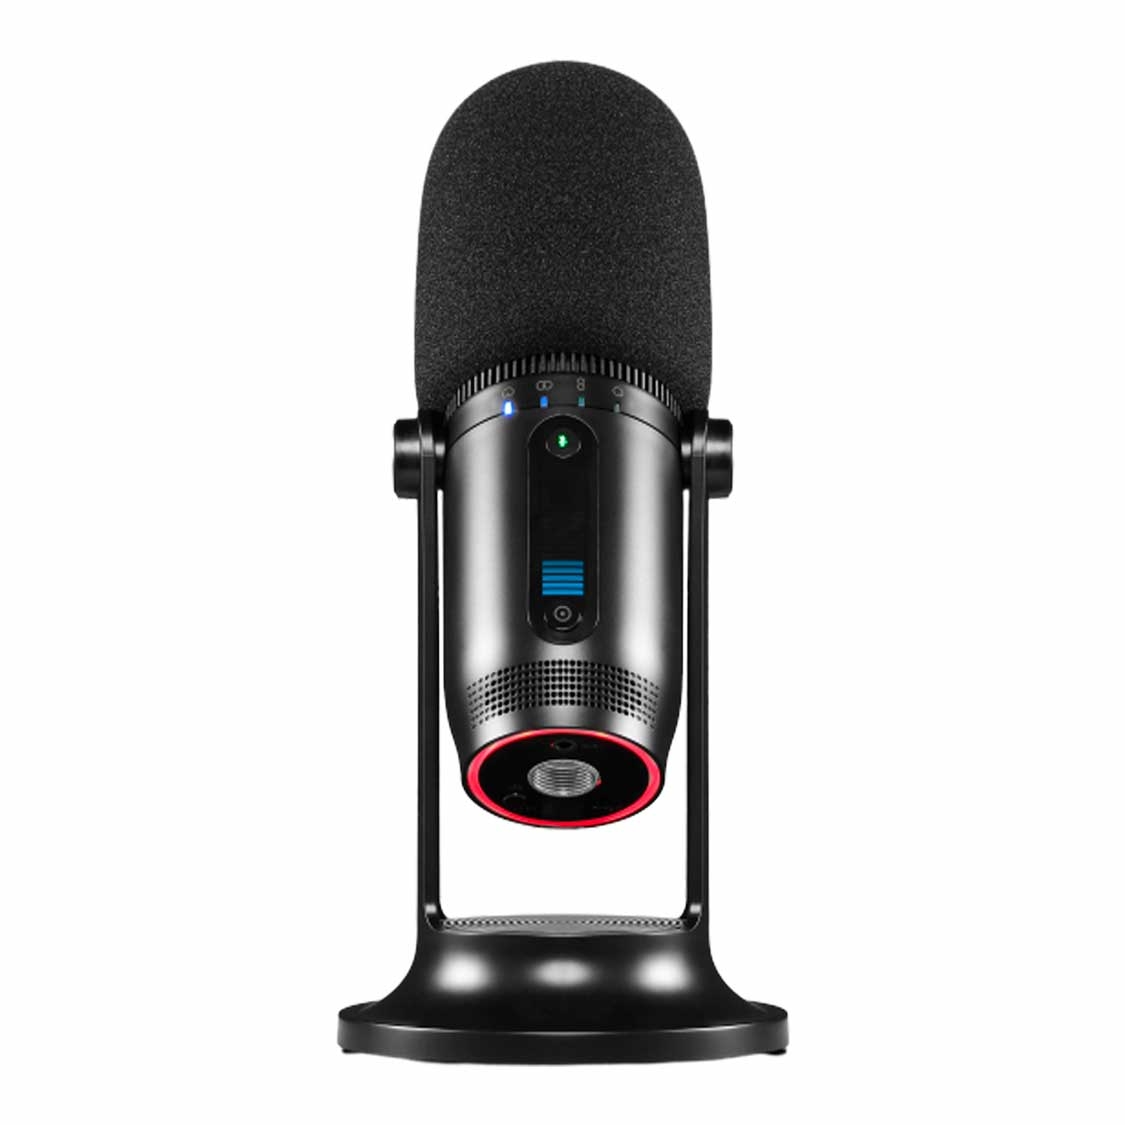 Thronmax MDrill One Pro USB Microphone (Jet Black)